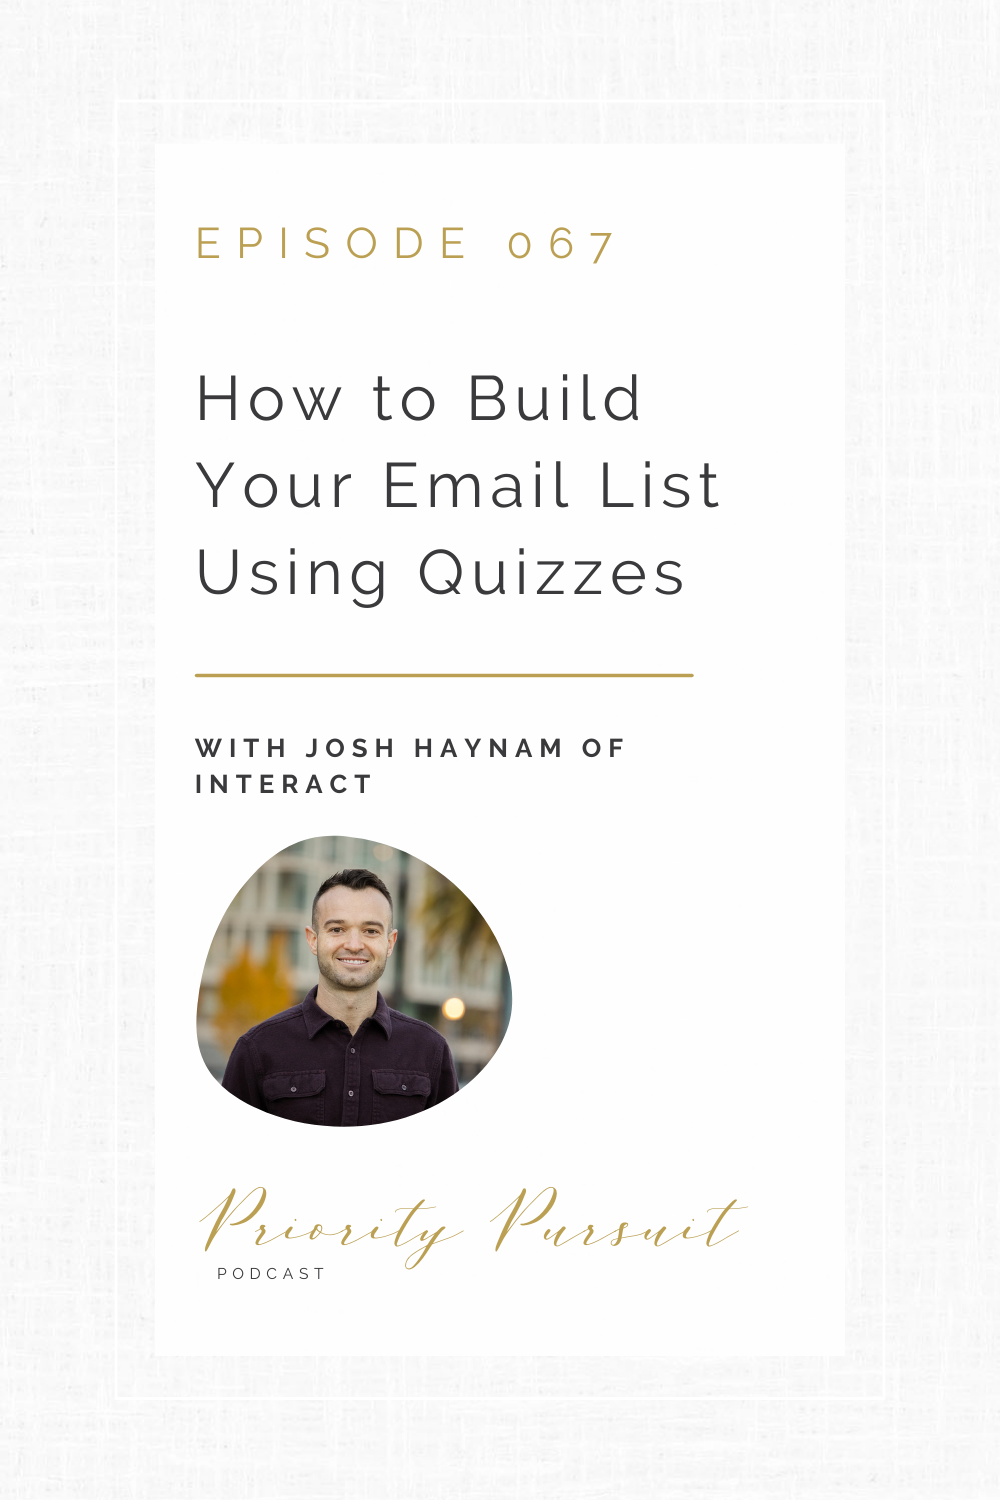 Victoria Rayburn and Josh Haynam discuss how you can connect with your audience and build your email list using quizzes.